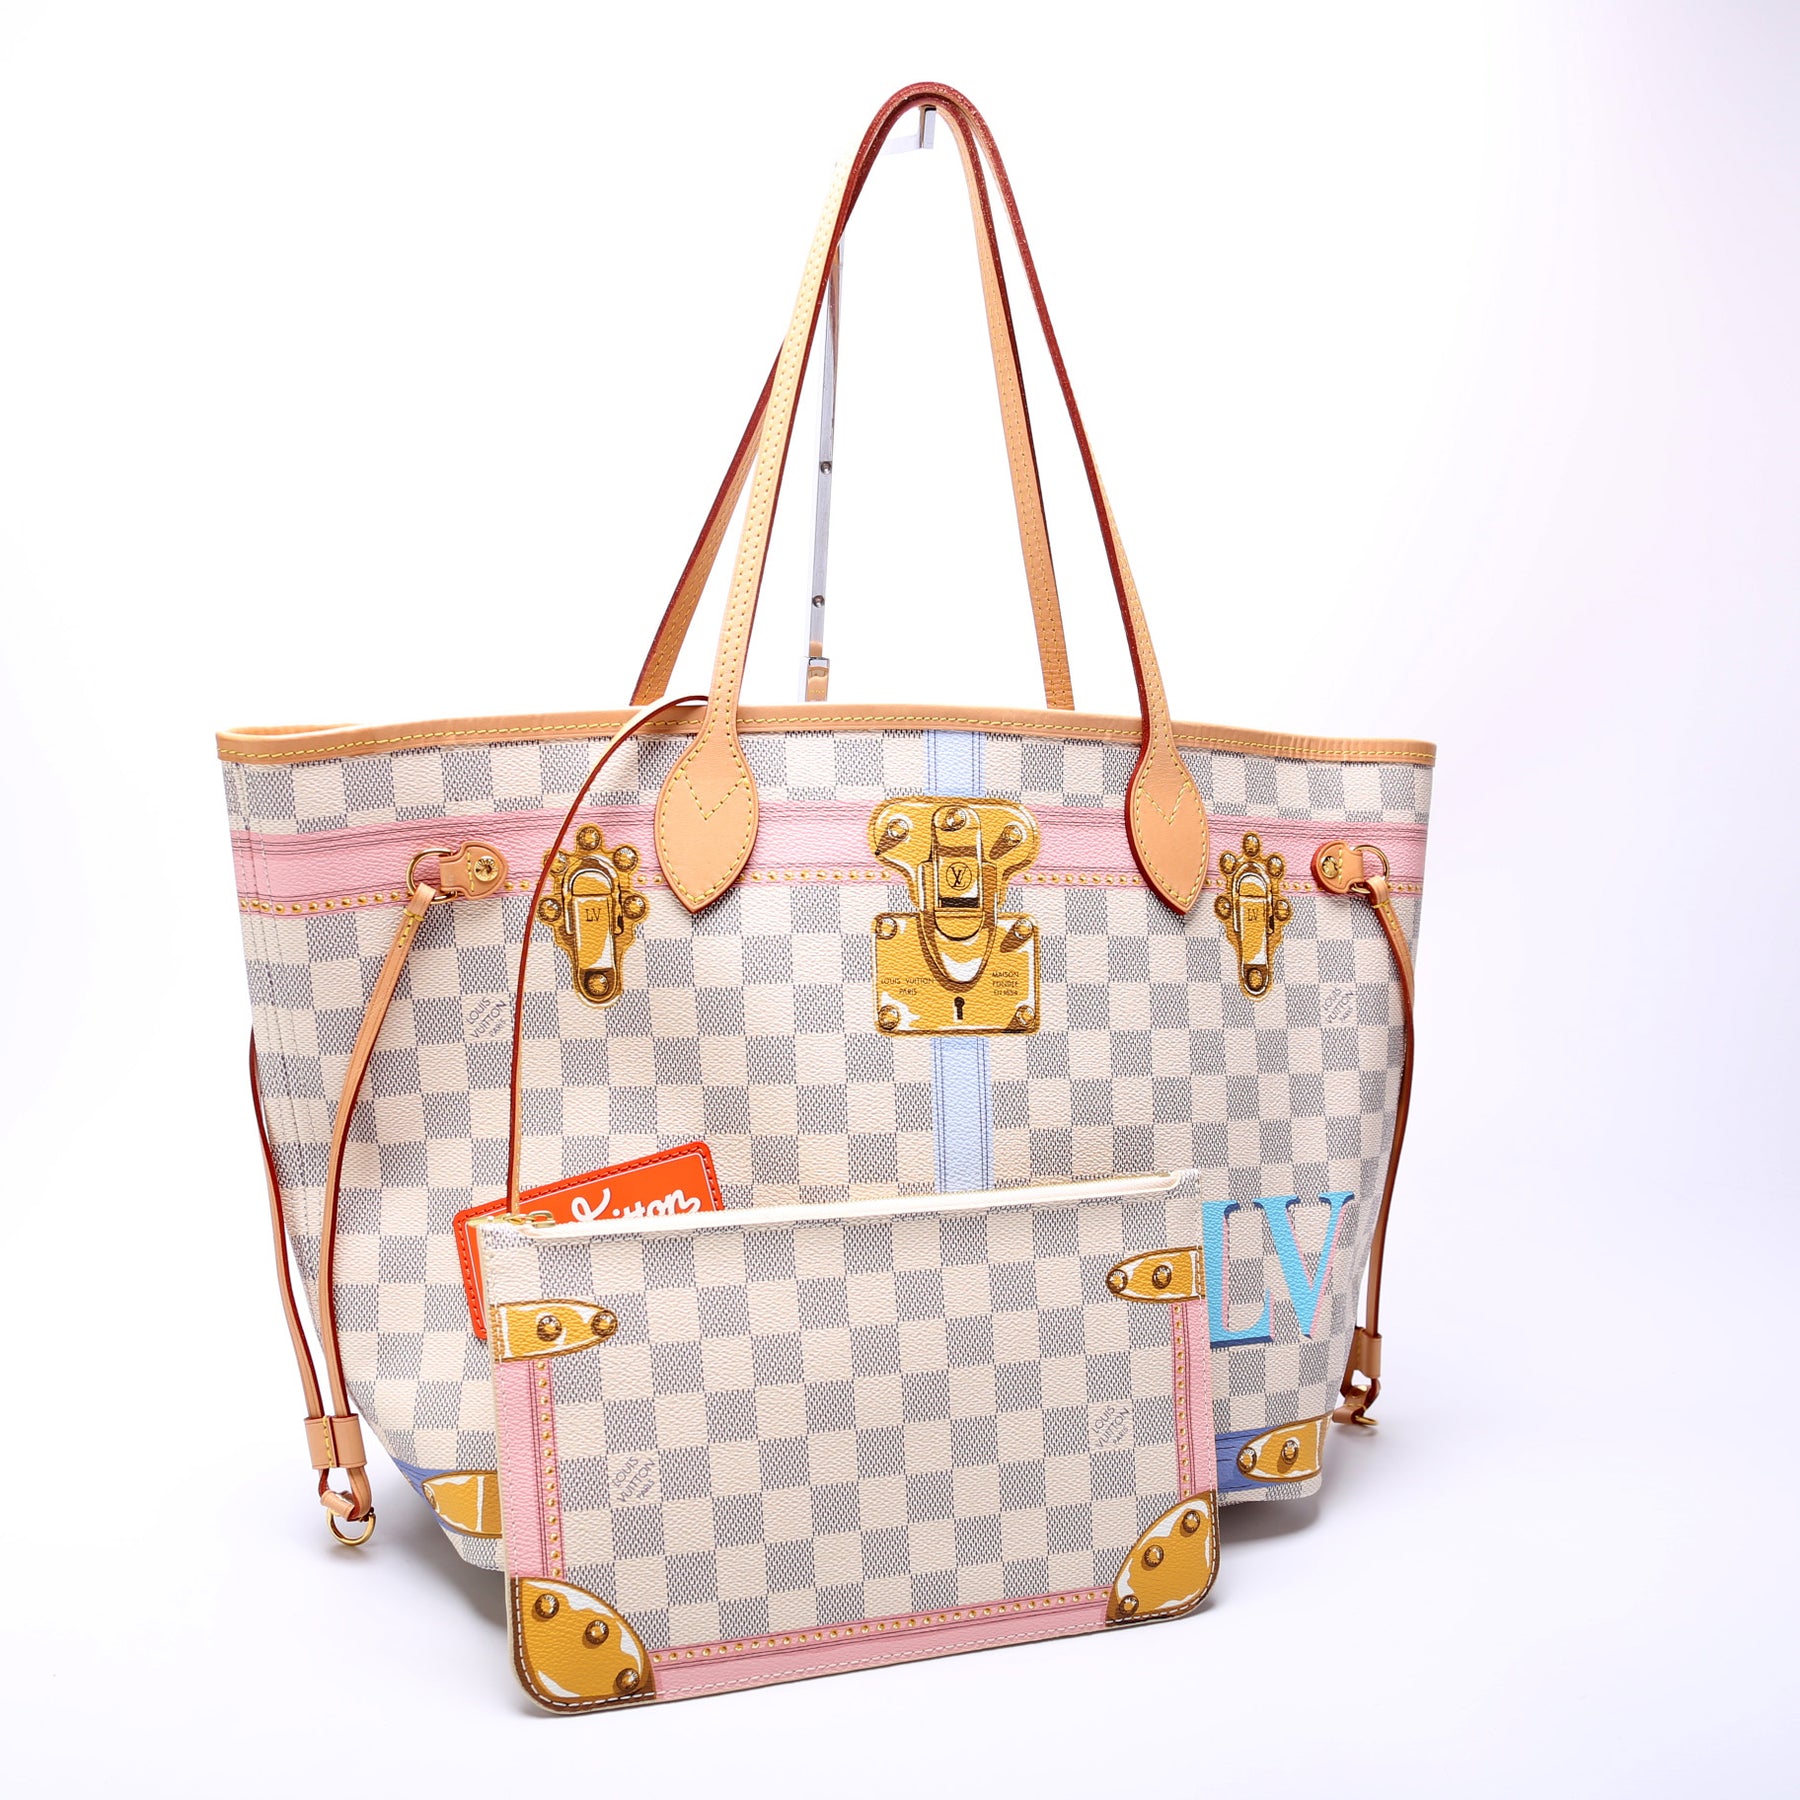 Louis Vuitton Damier Azur St. Tropez Summer Trunk Neverfull MM of Coated  Canvas and Vachetta Leather Trim with Polished Golden Brass Hardware, Handbags and Accessories Online, Ecommerce Retail